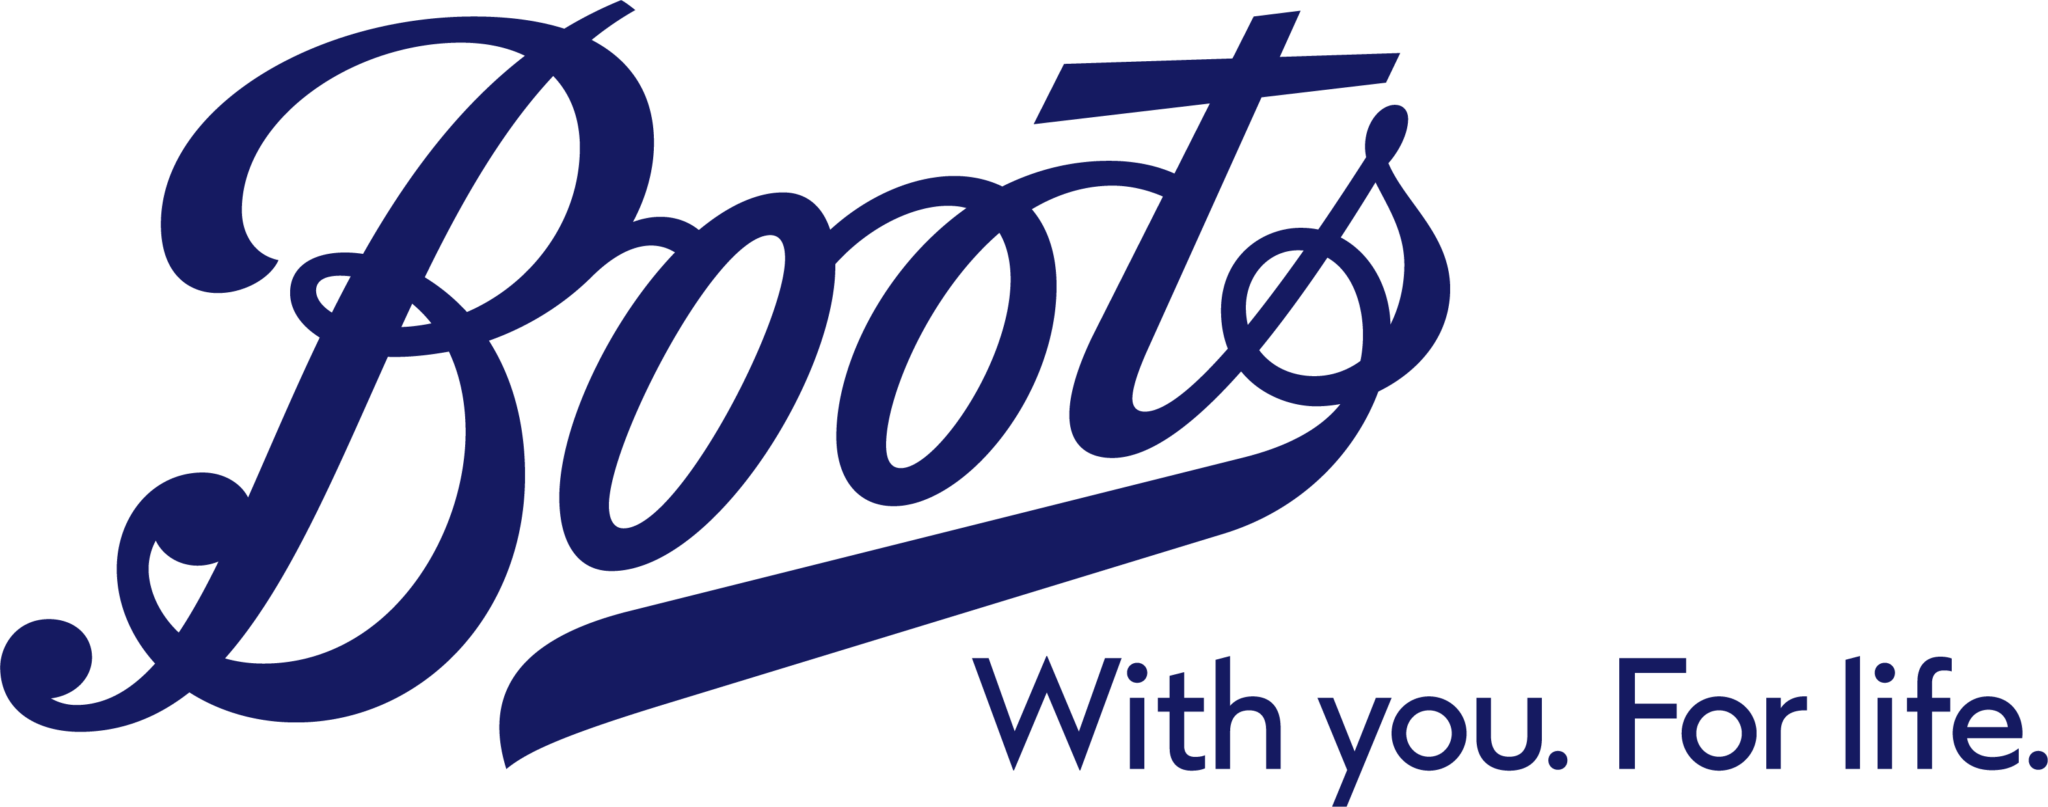 Boots_With you. For life